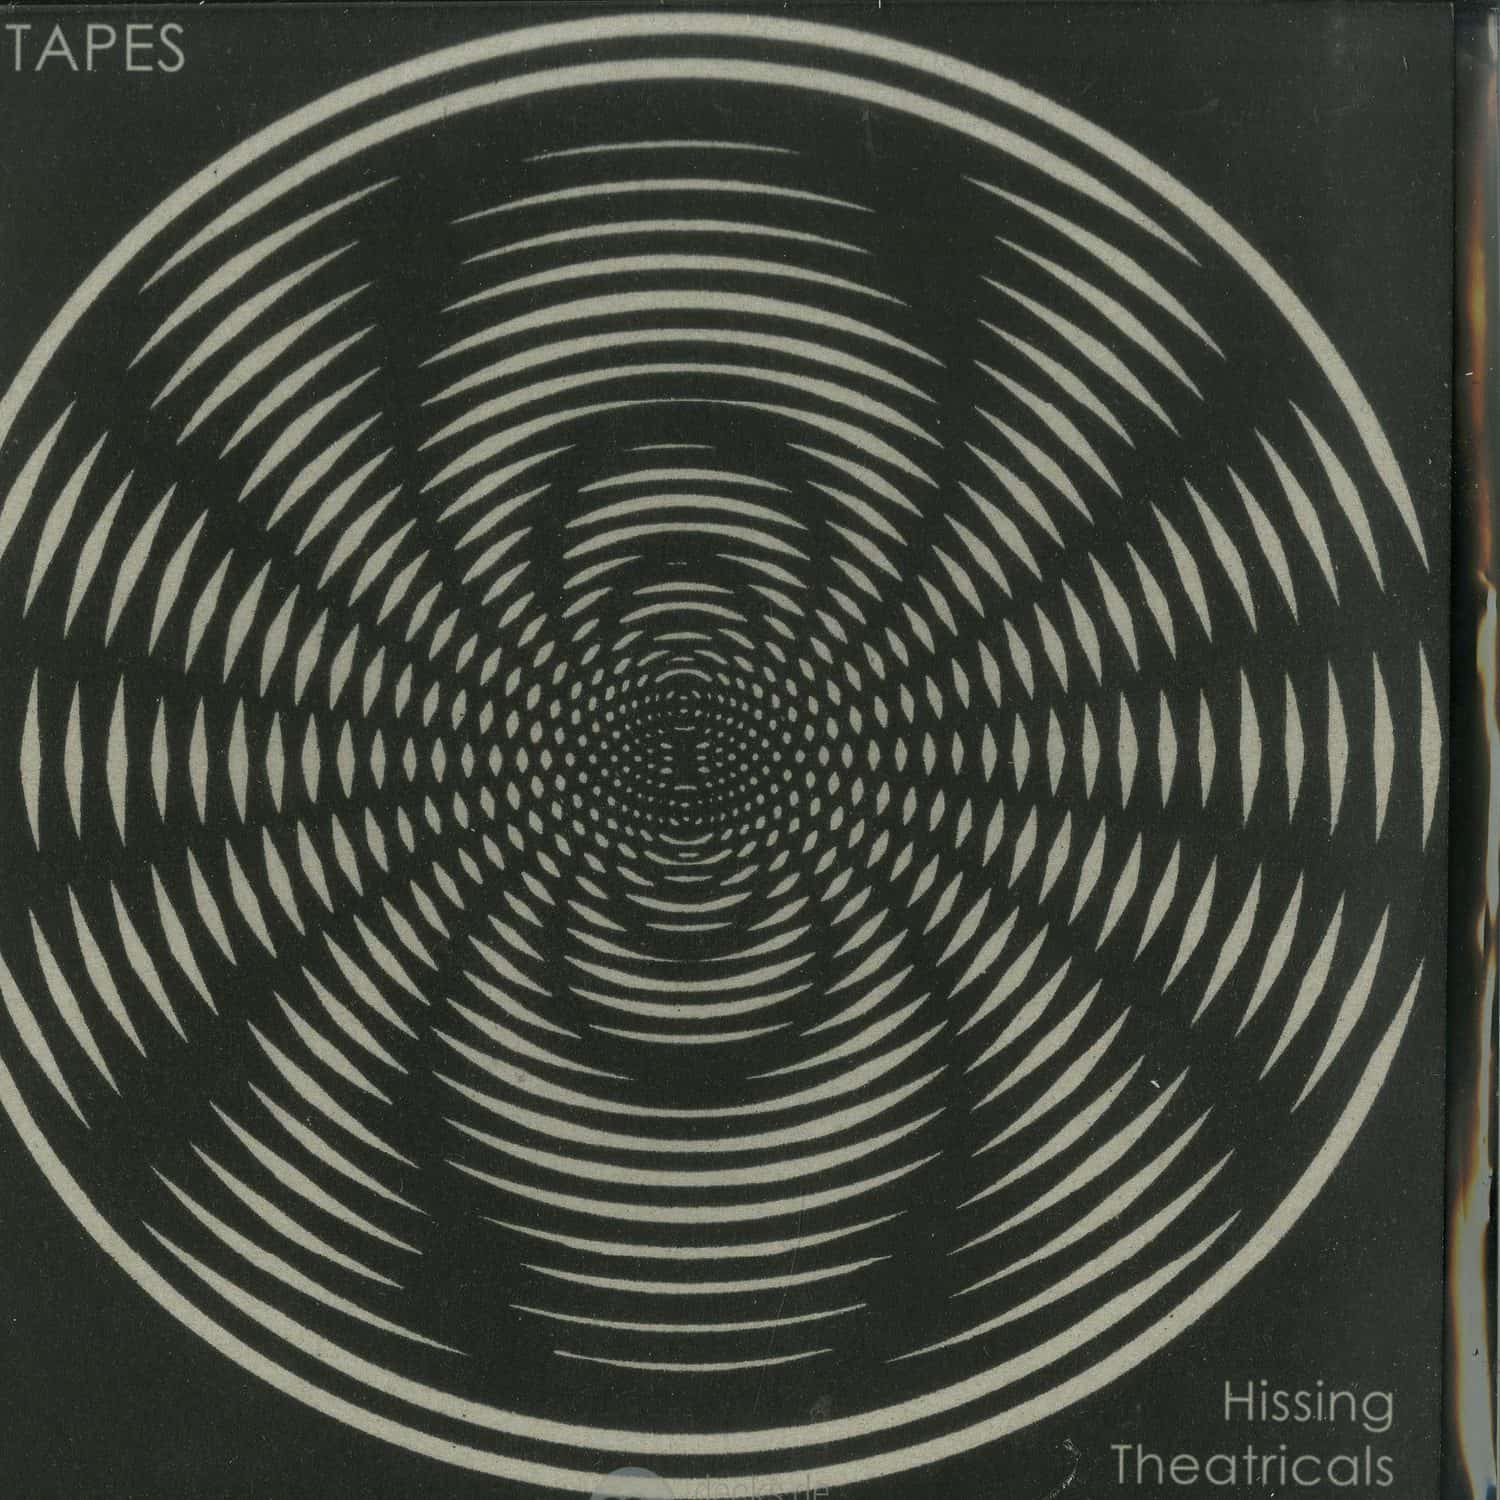 Tapes - HISSING THETRICALS EP